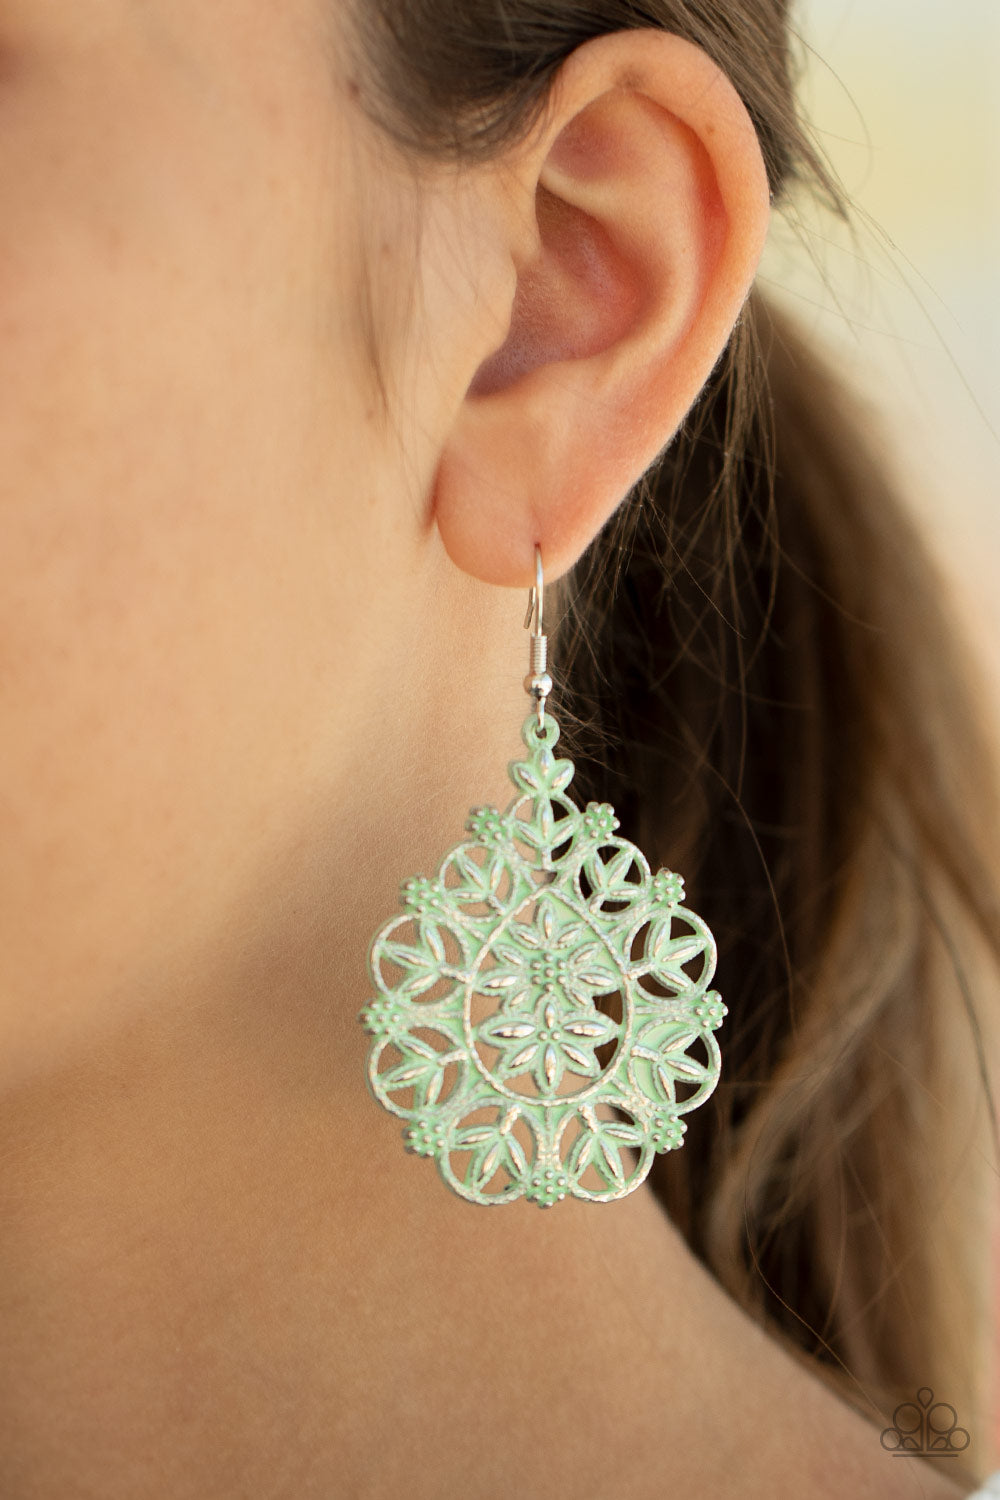 Paparazzi Accessories - Floral Affair - Green Earrings